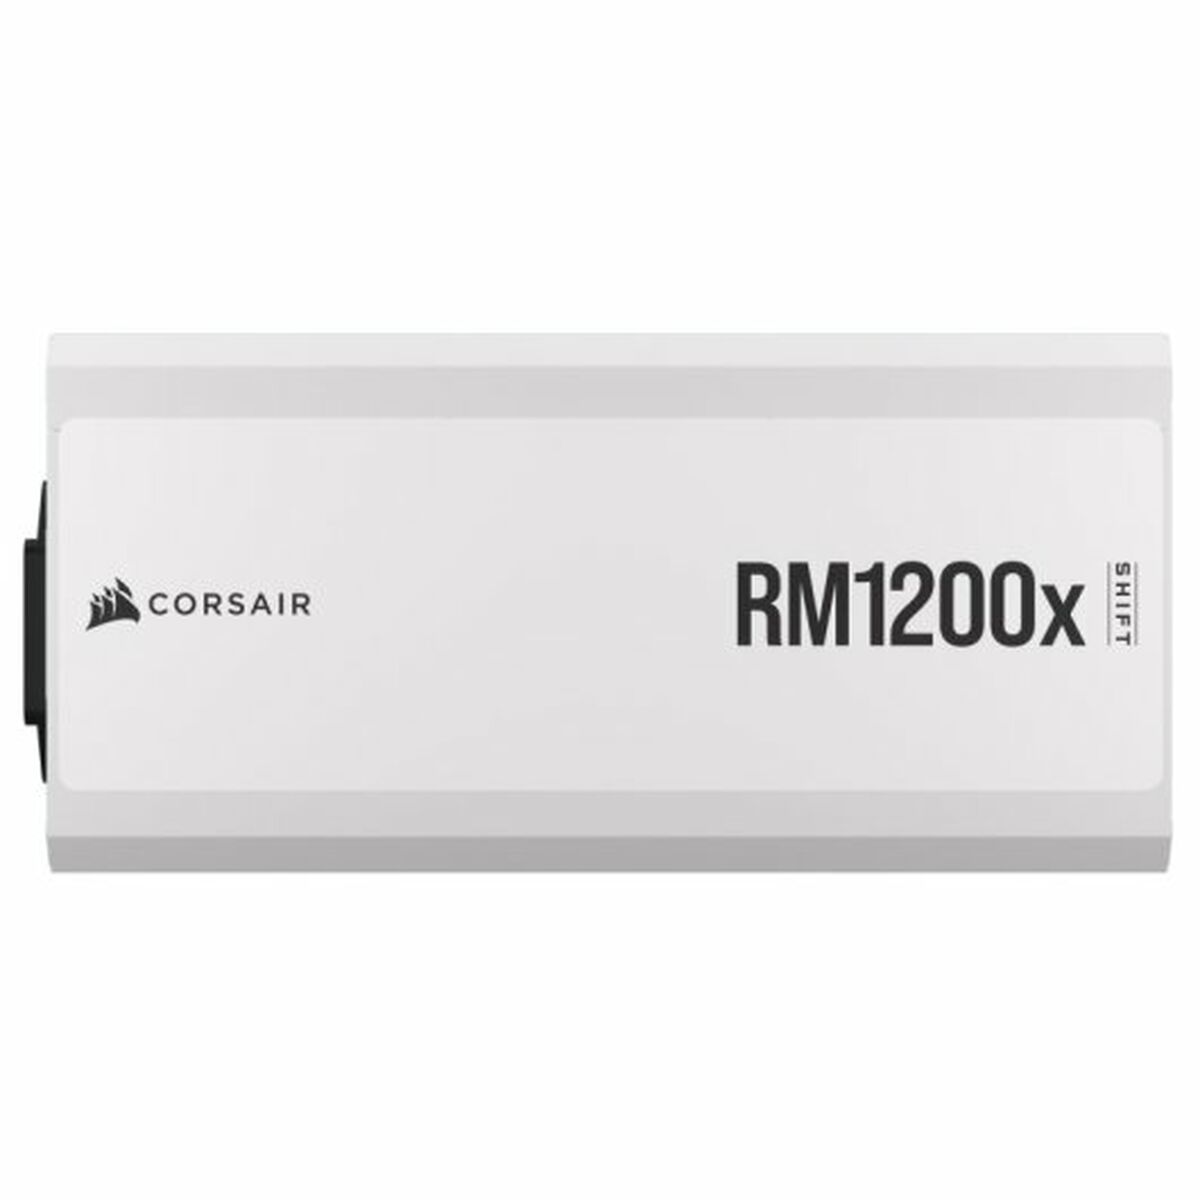 Power supply Corsair RM1000x  1200 W 80 Plus Gold, Corsair, Computing, Components, power-supply-corsair-rm1000x-1200-w-80-plus-gold, :1200W, Brand_Corsair, category-reference-2609, category-reference-2803, category-reference-2816, category-reference-t-19685, category-reference-t-19912, category-reference-t-21360, category-reference-t-25656, computers / components, Condition_NEW, ferretería, Price_200 - 300, Teleworking, RiotNook